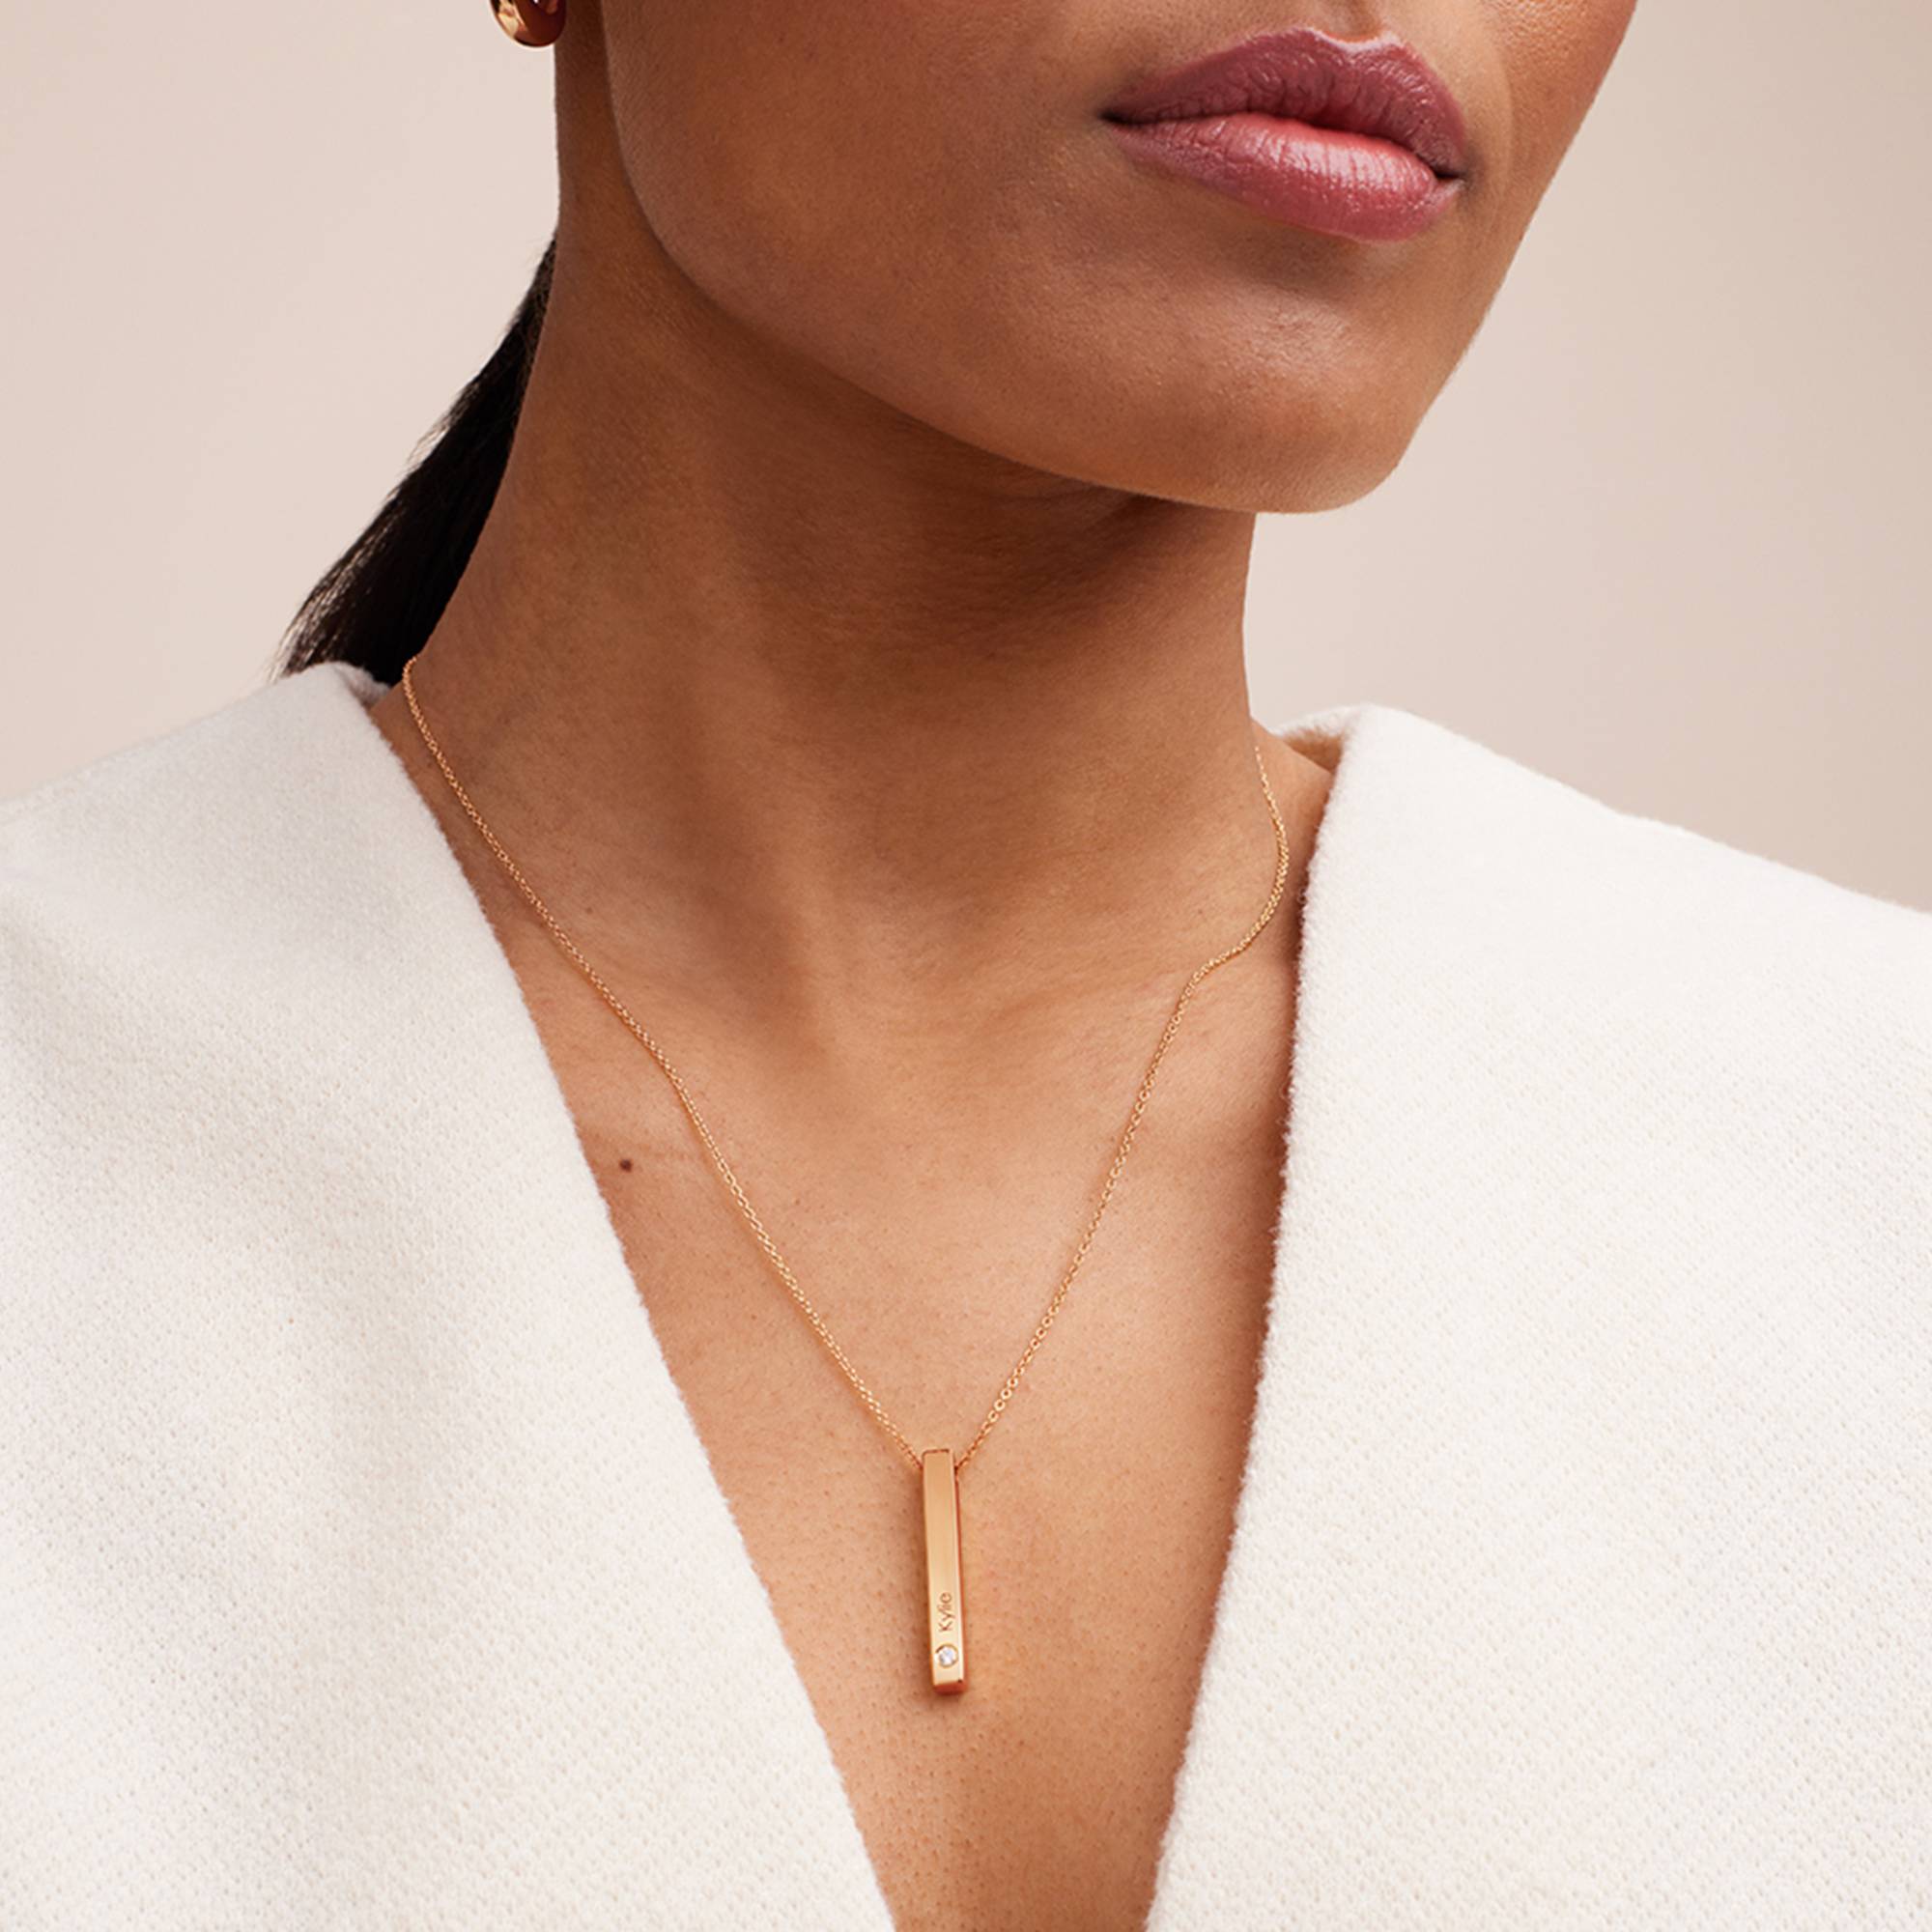 Vertical 3d Bar Necklace with Diamonds in 18k Rose Gold Vermeil-2 product photo